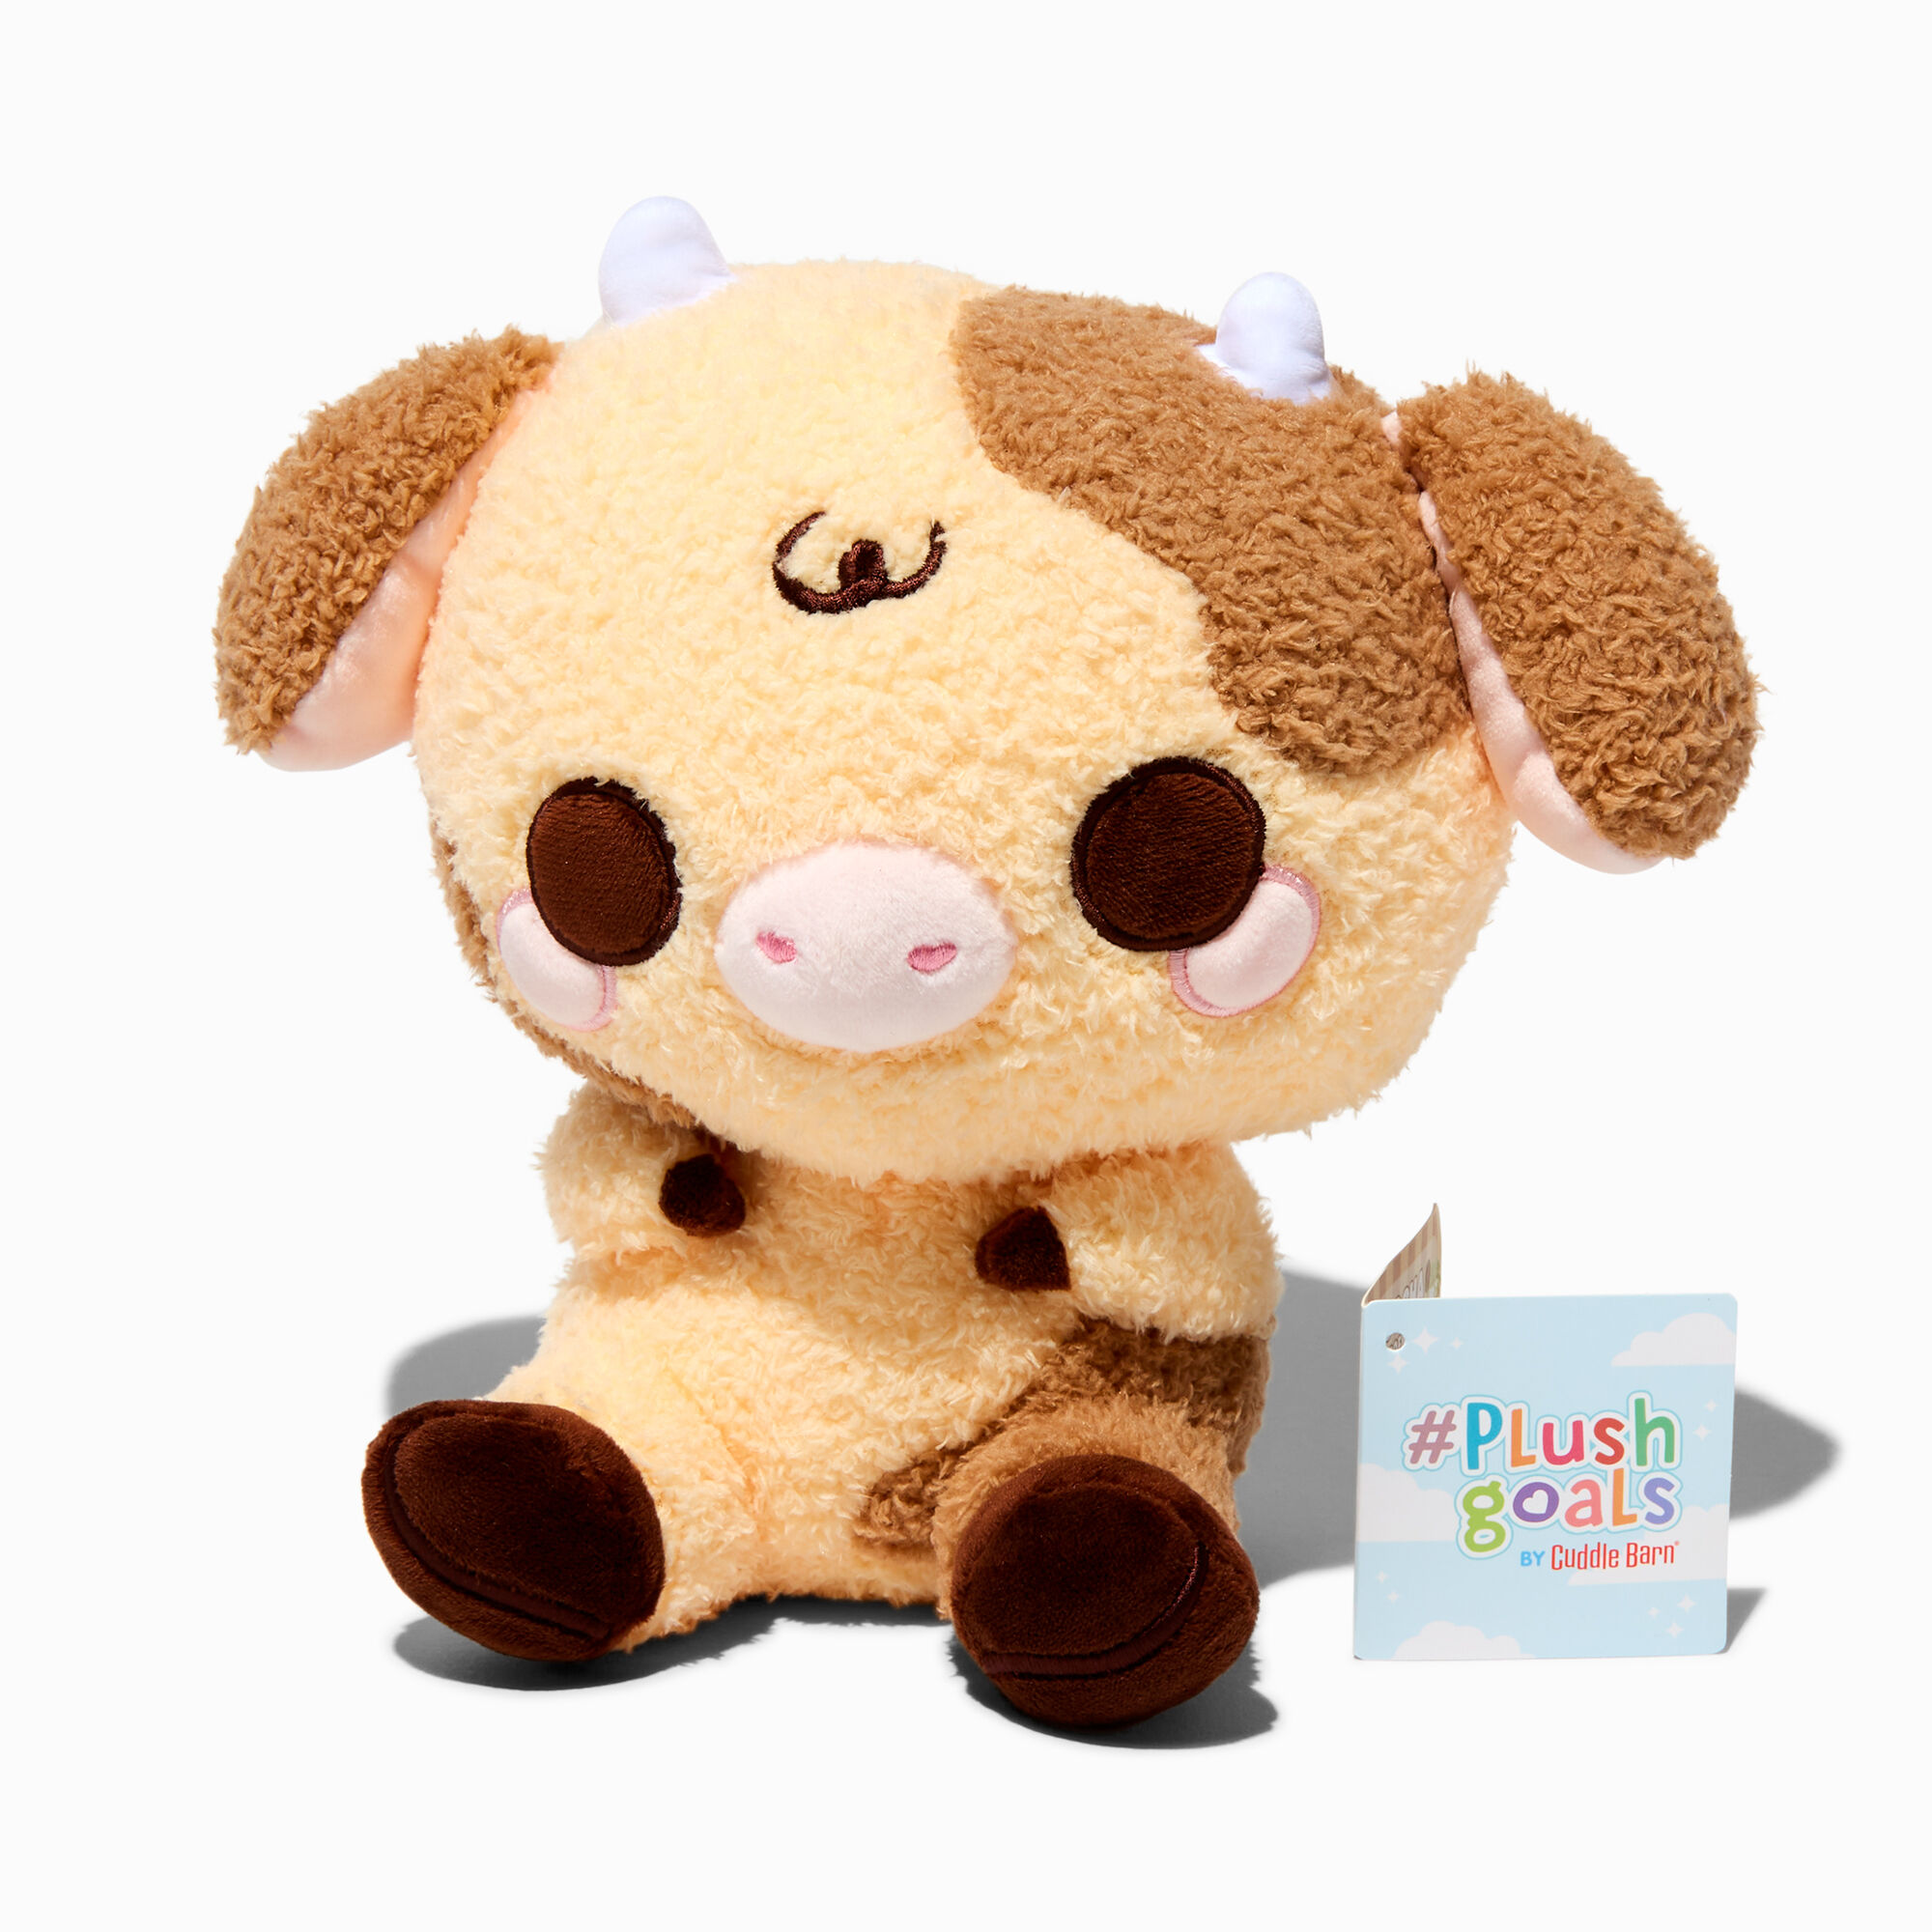 View Claires plush Goals By Cuddle Barn 10 Moocha Cow Soft Toy information